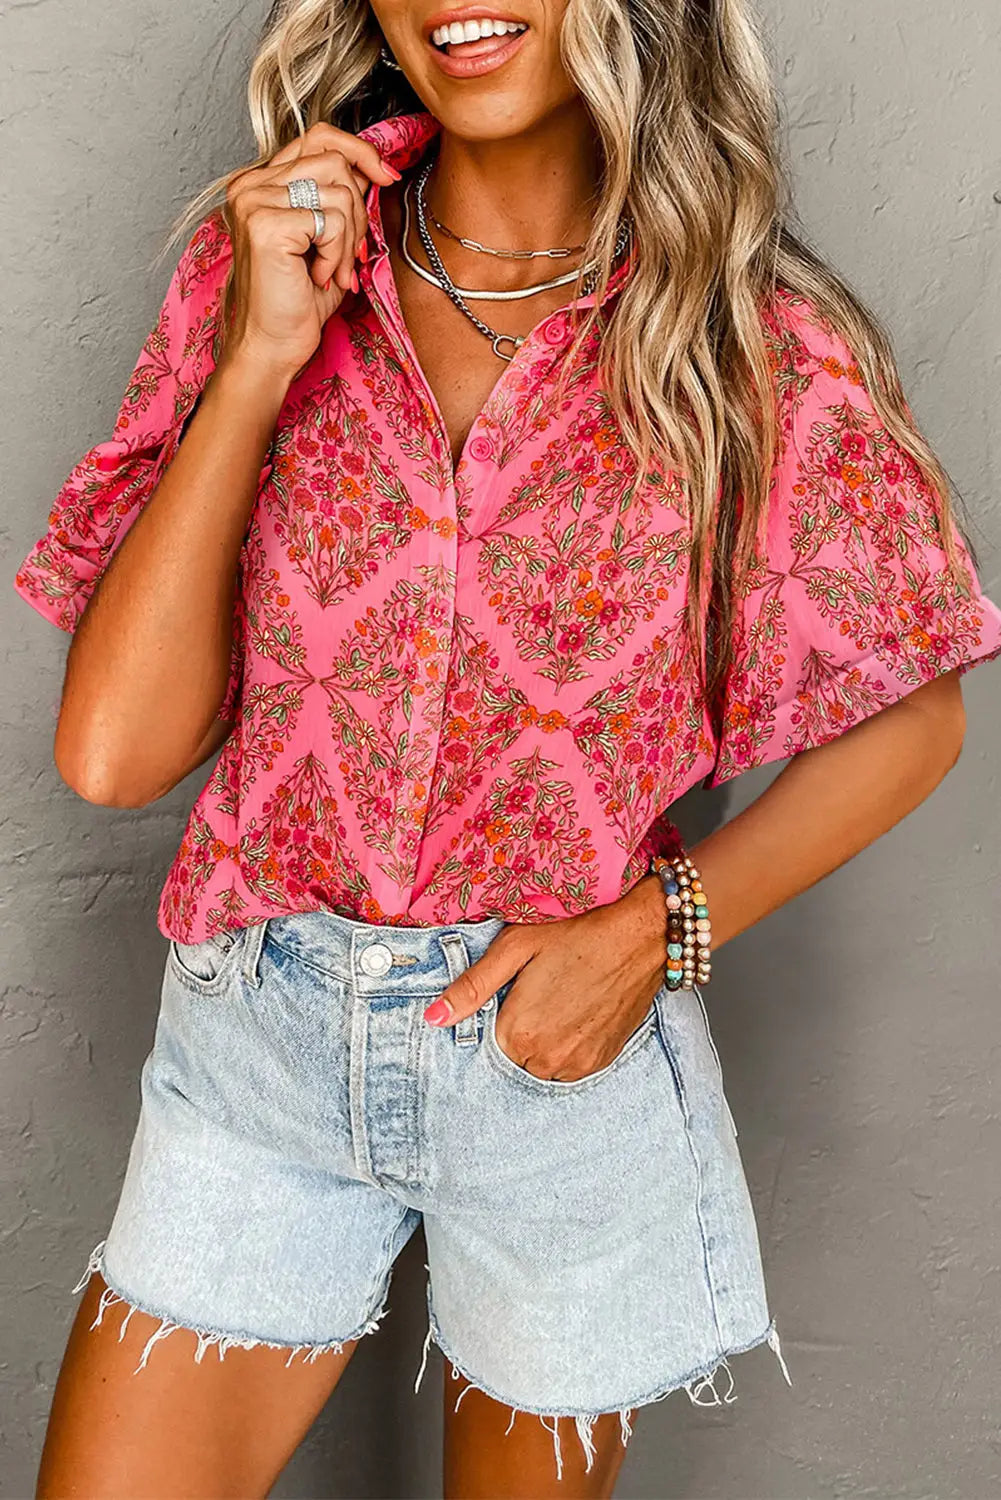 Rose red floral loose shirt - s / 100% polyester - tops/blouses & shirts